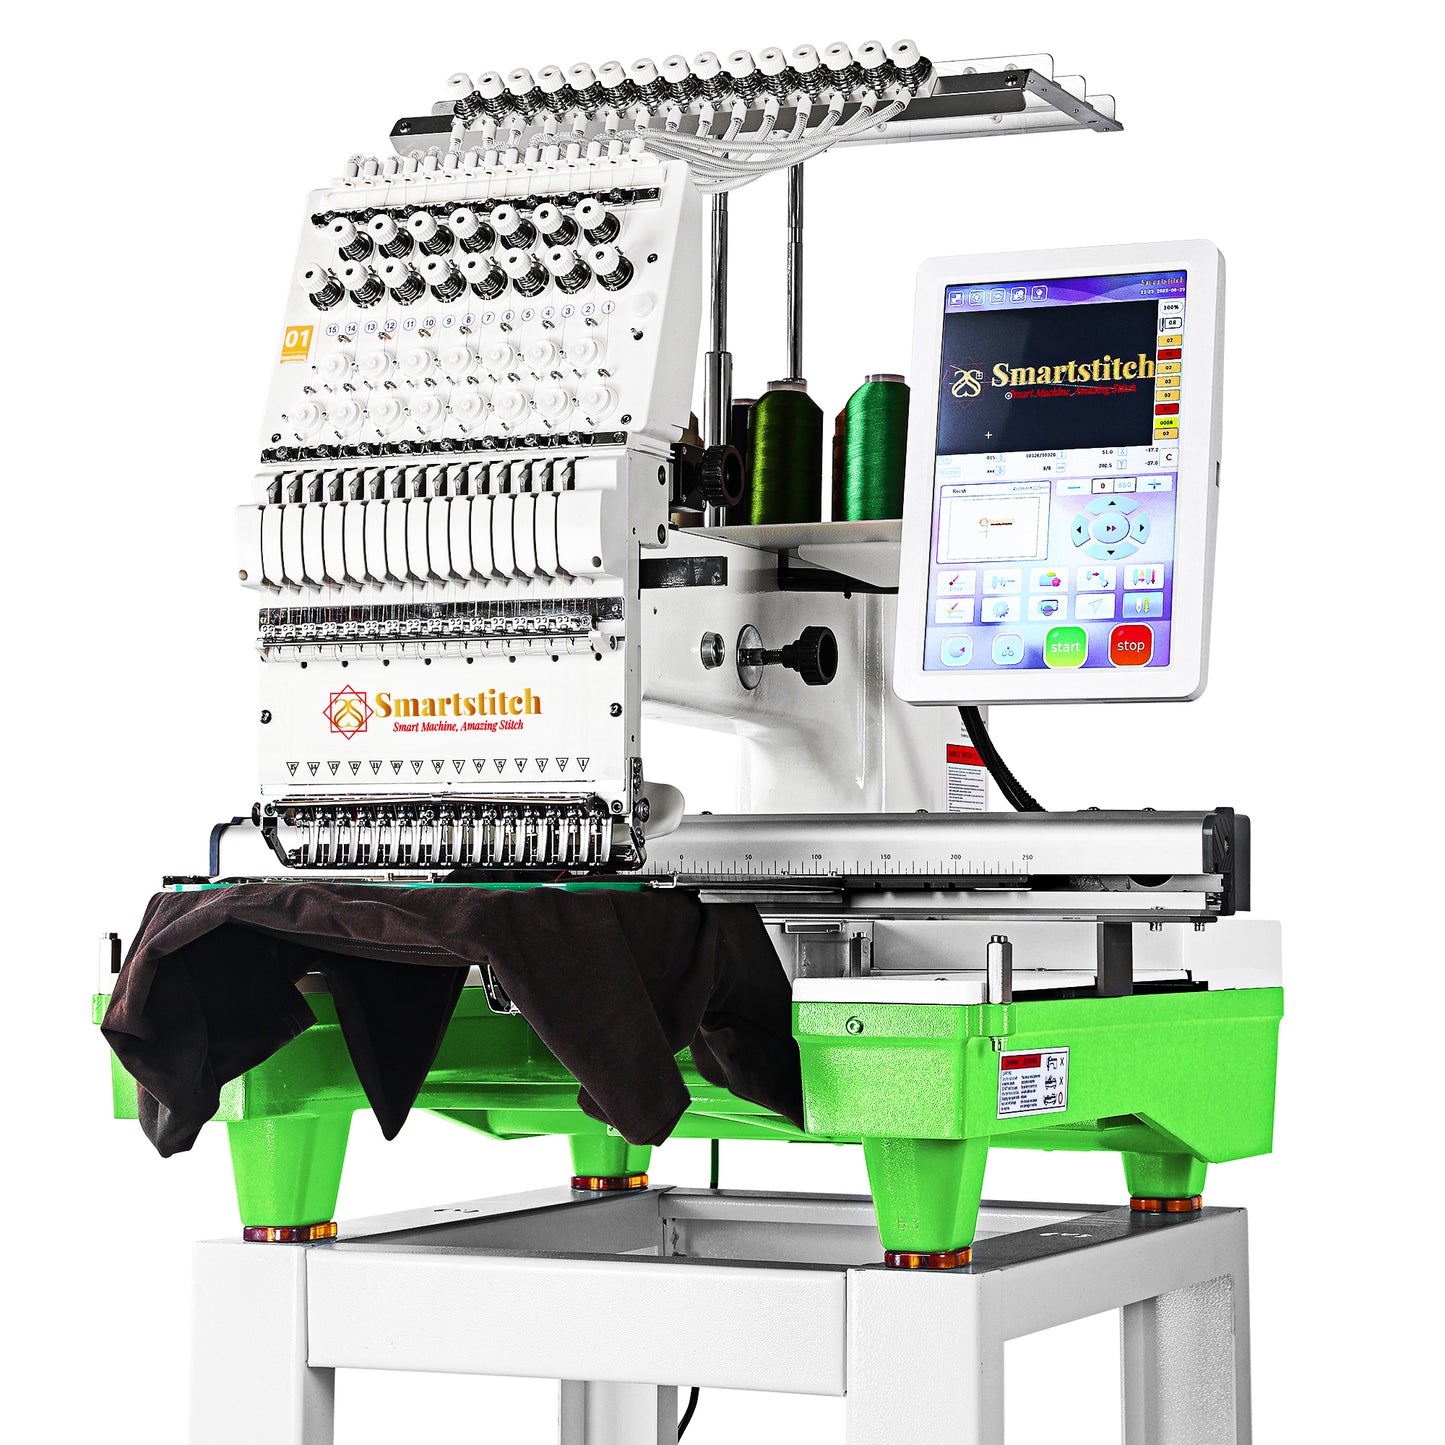 Smartstitch Embroidery Machine S1501, 15 Needles, Max Speed 1200RPM, Commercial Embroidery Machine for Hats and Clothing with 13.8"x19.7" Embroidery Area(Green)